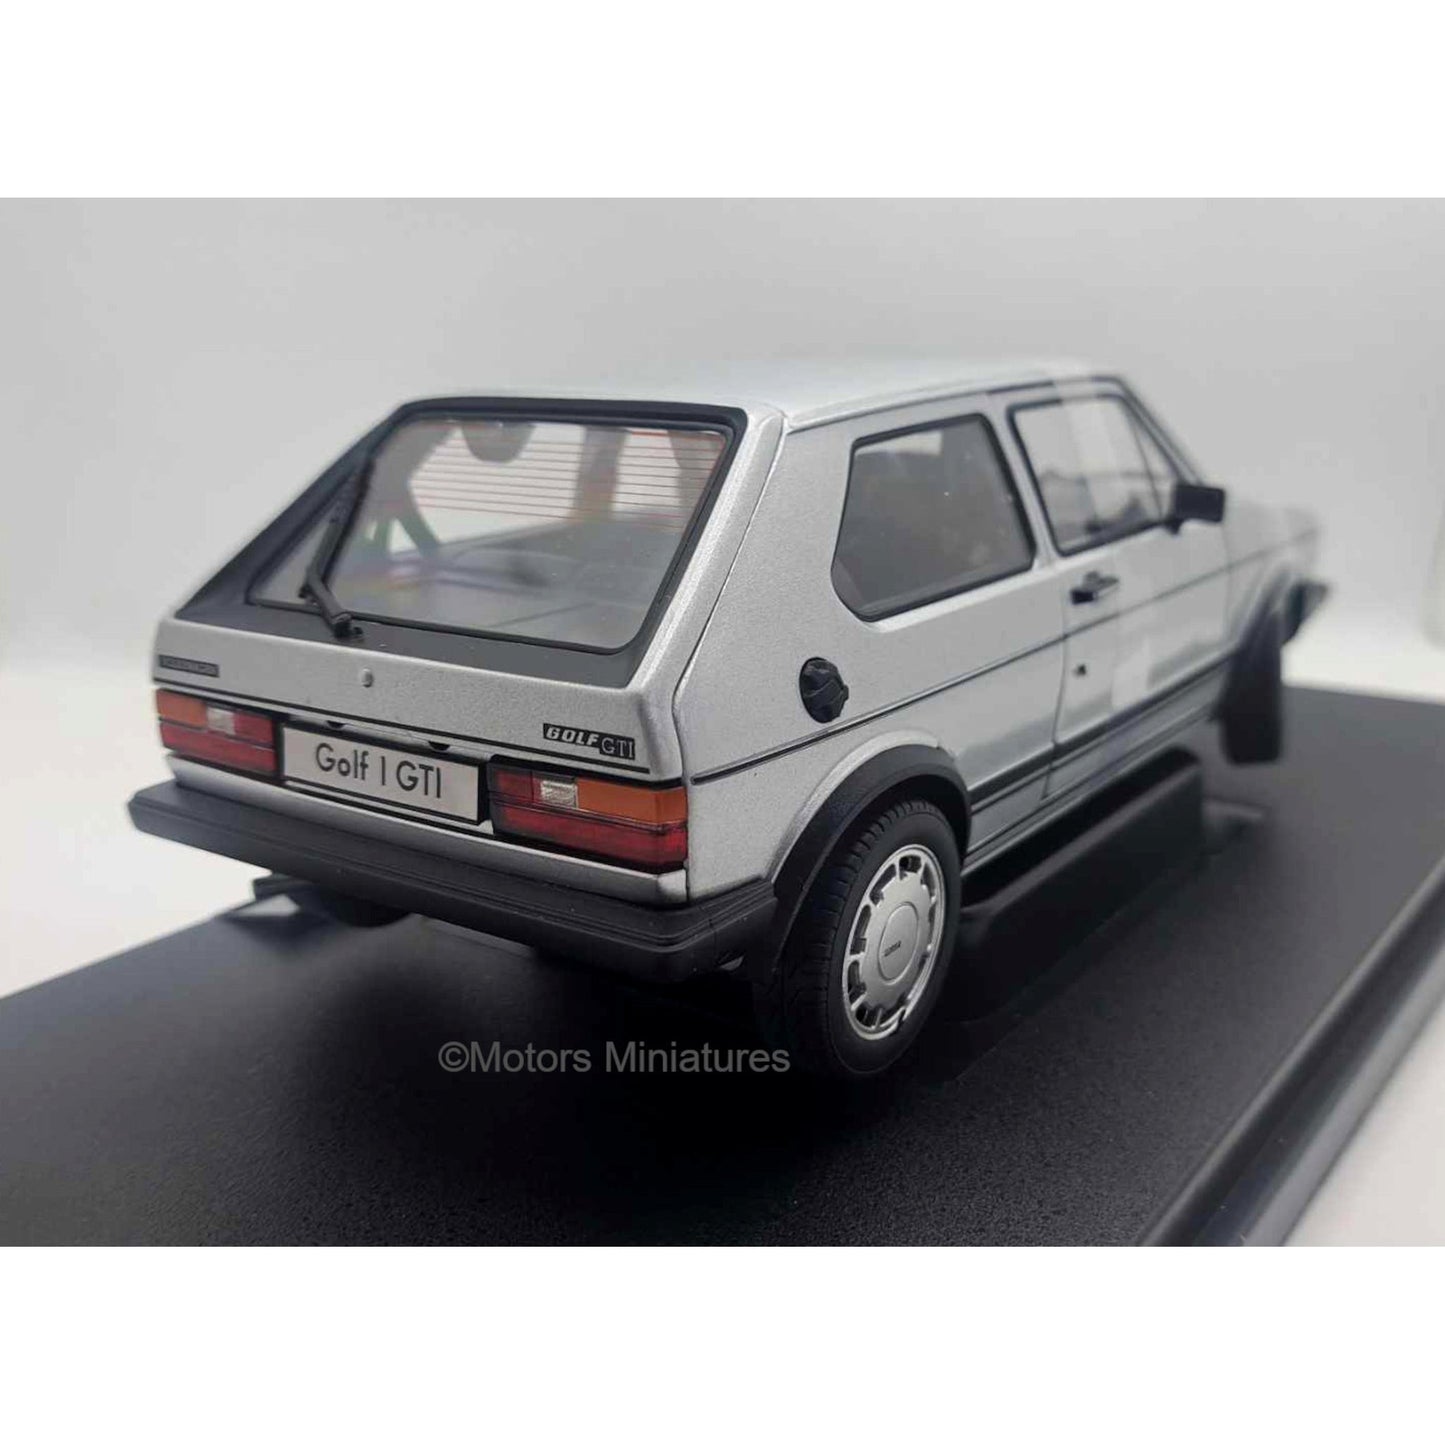 Volkswagen Golf I GTi Silver Welly 1/18 - welly18039s